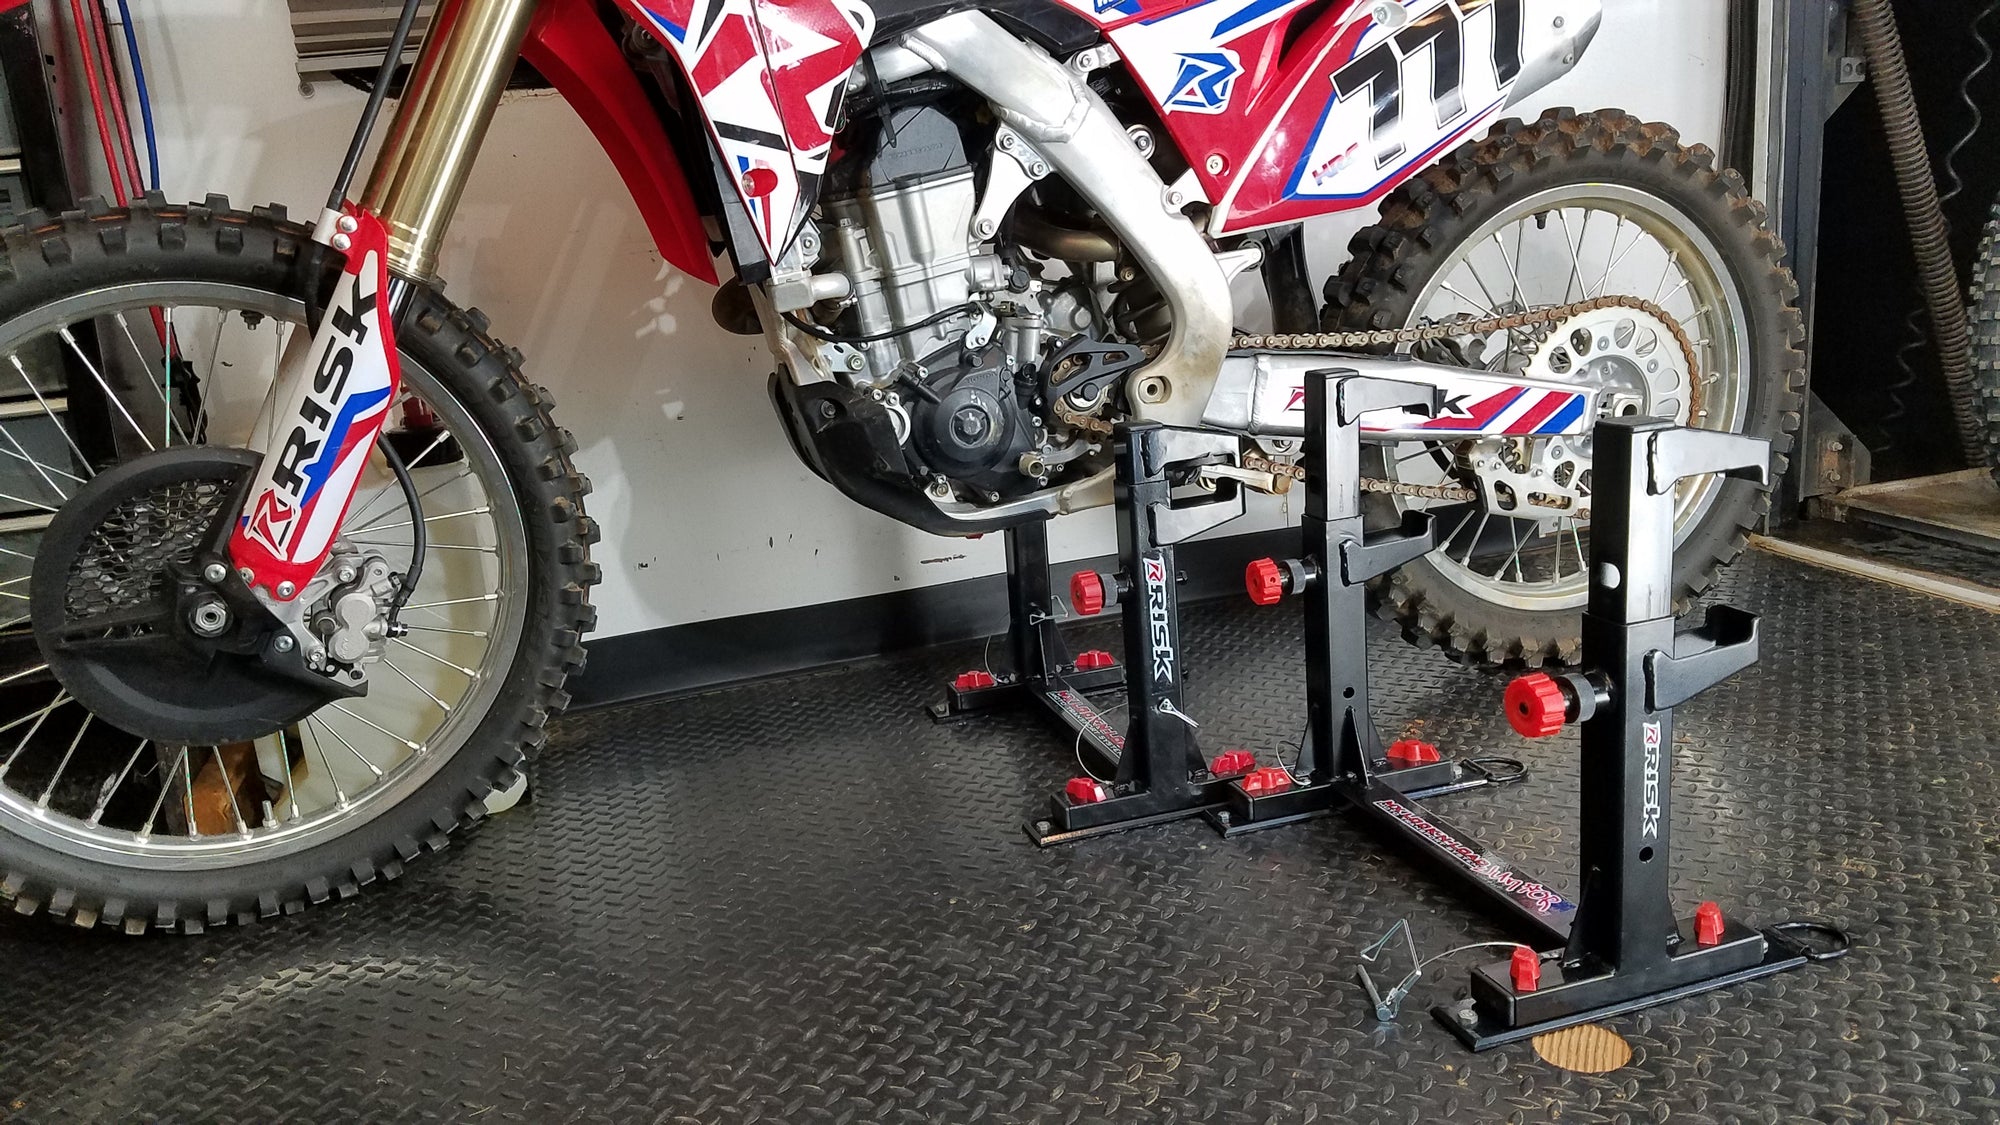 trailer with 2 lock-n-load moto transport systems. One empty and one with a dirt bike installed